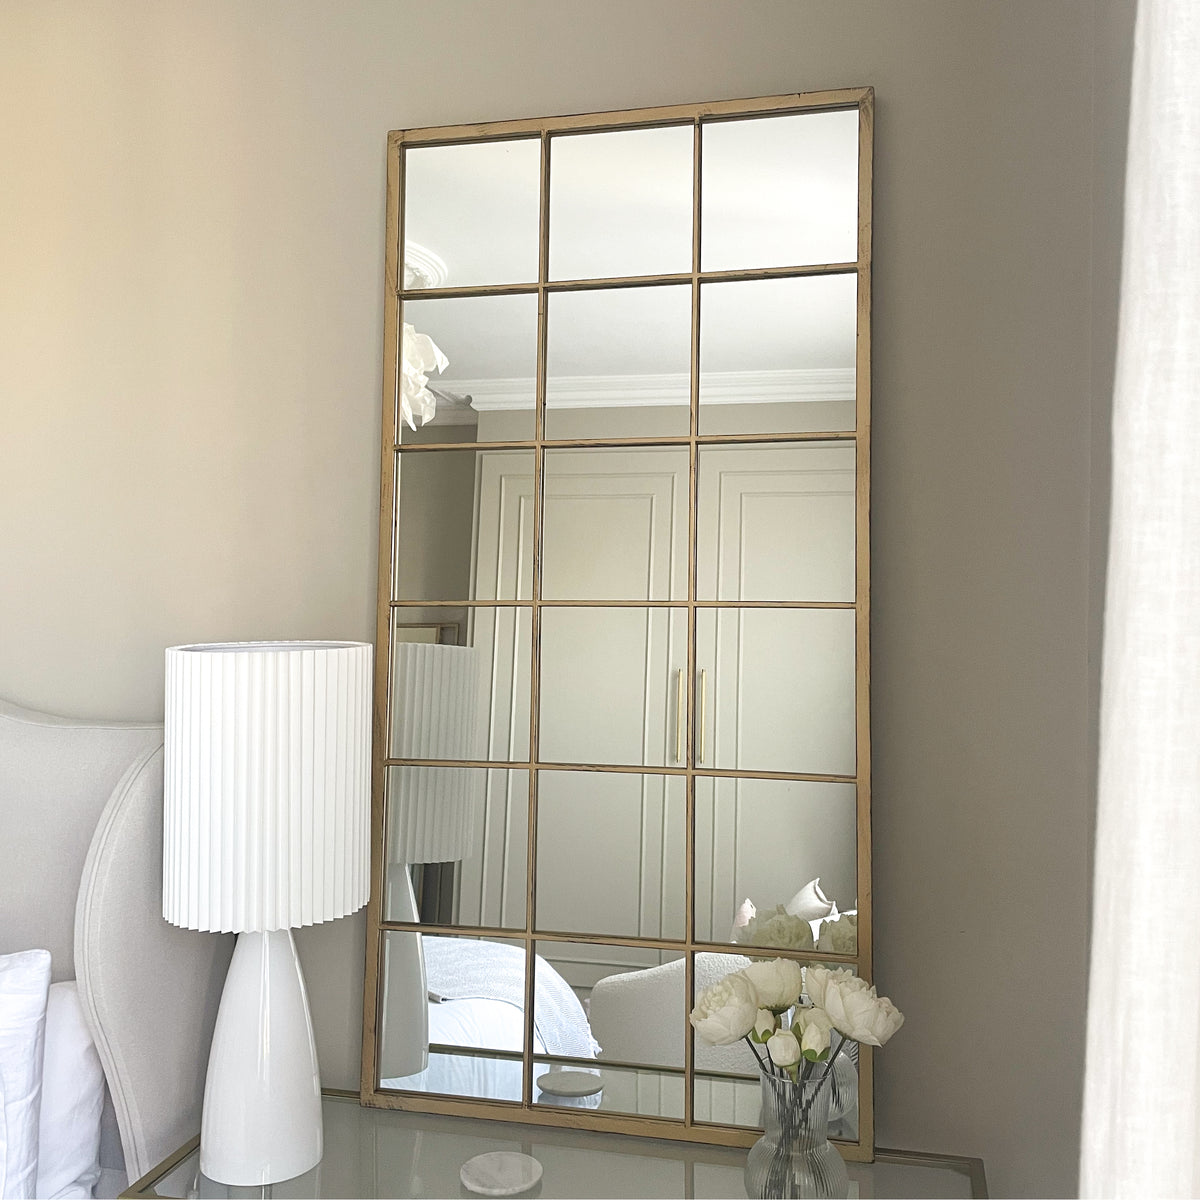 Large gold industrial metal window mirror leaning against wall